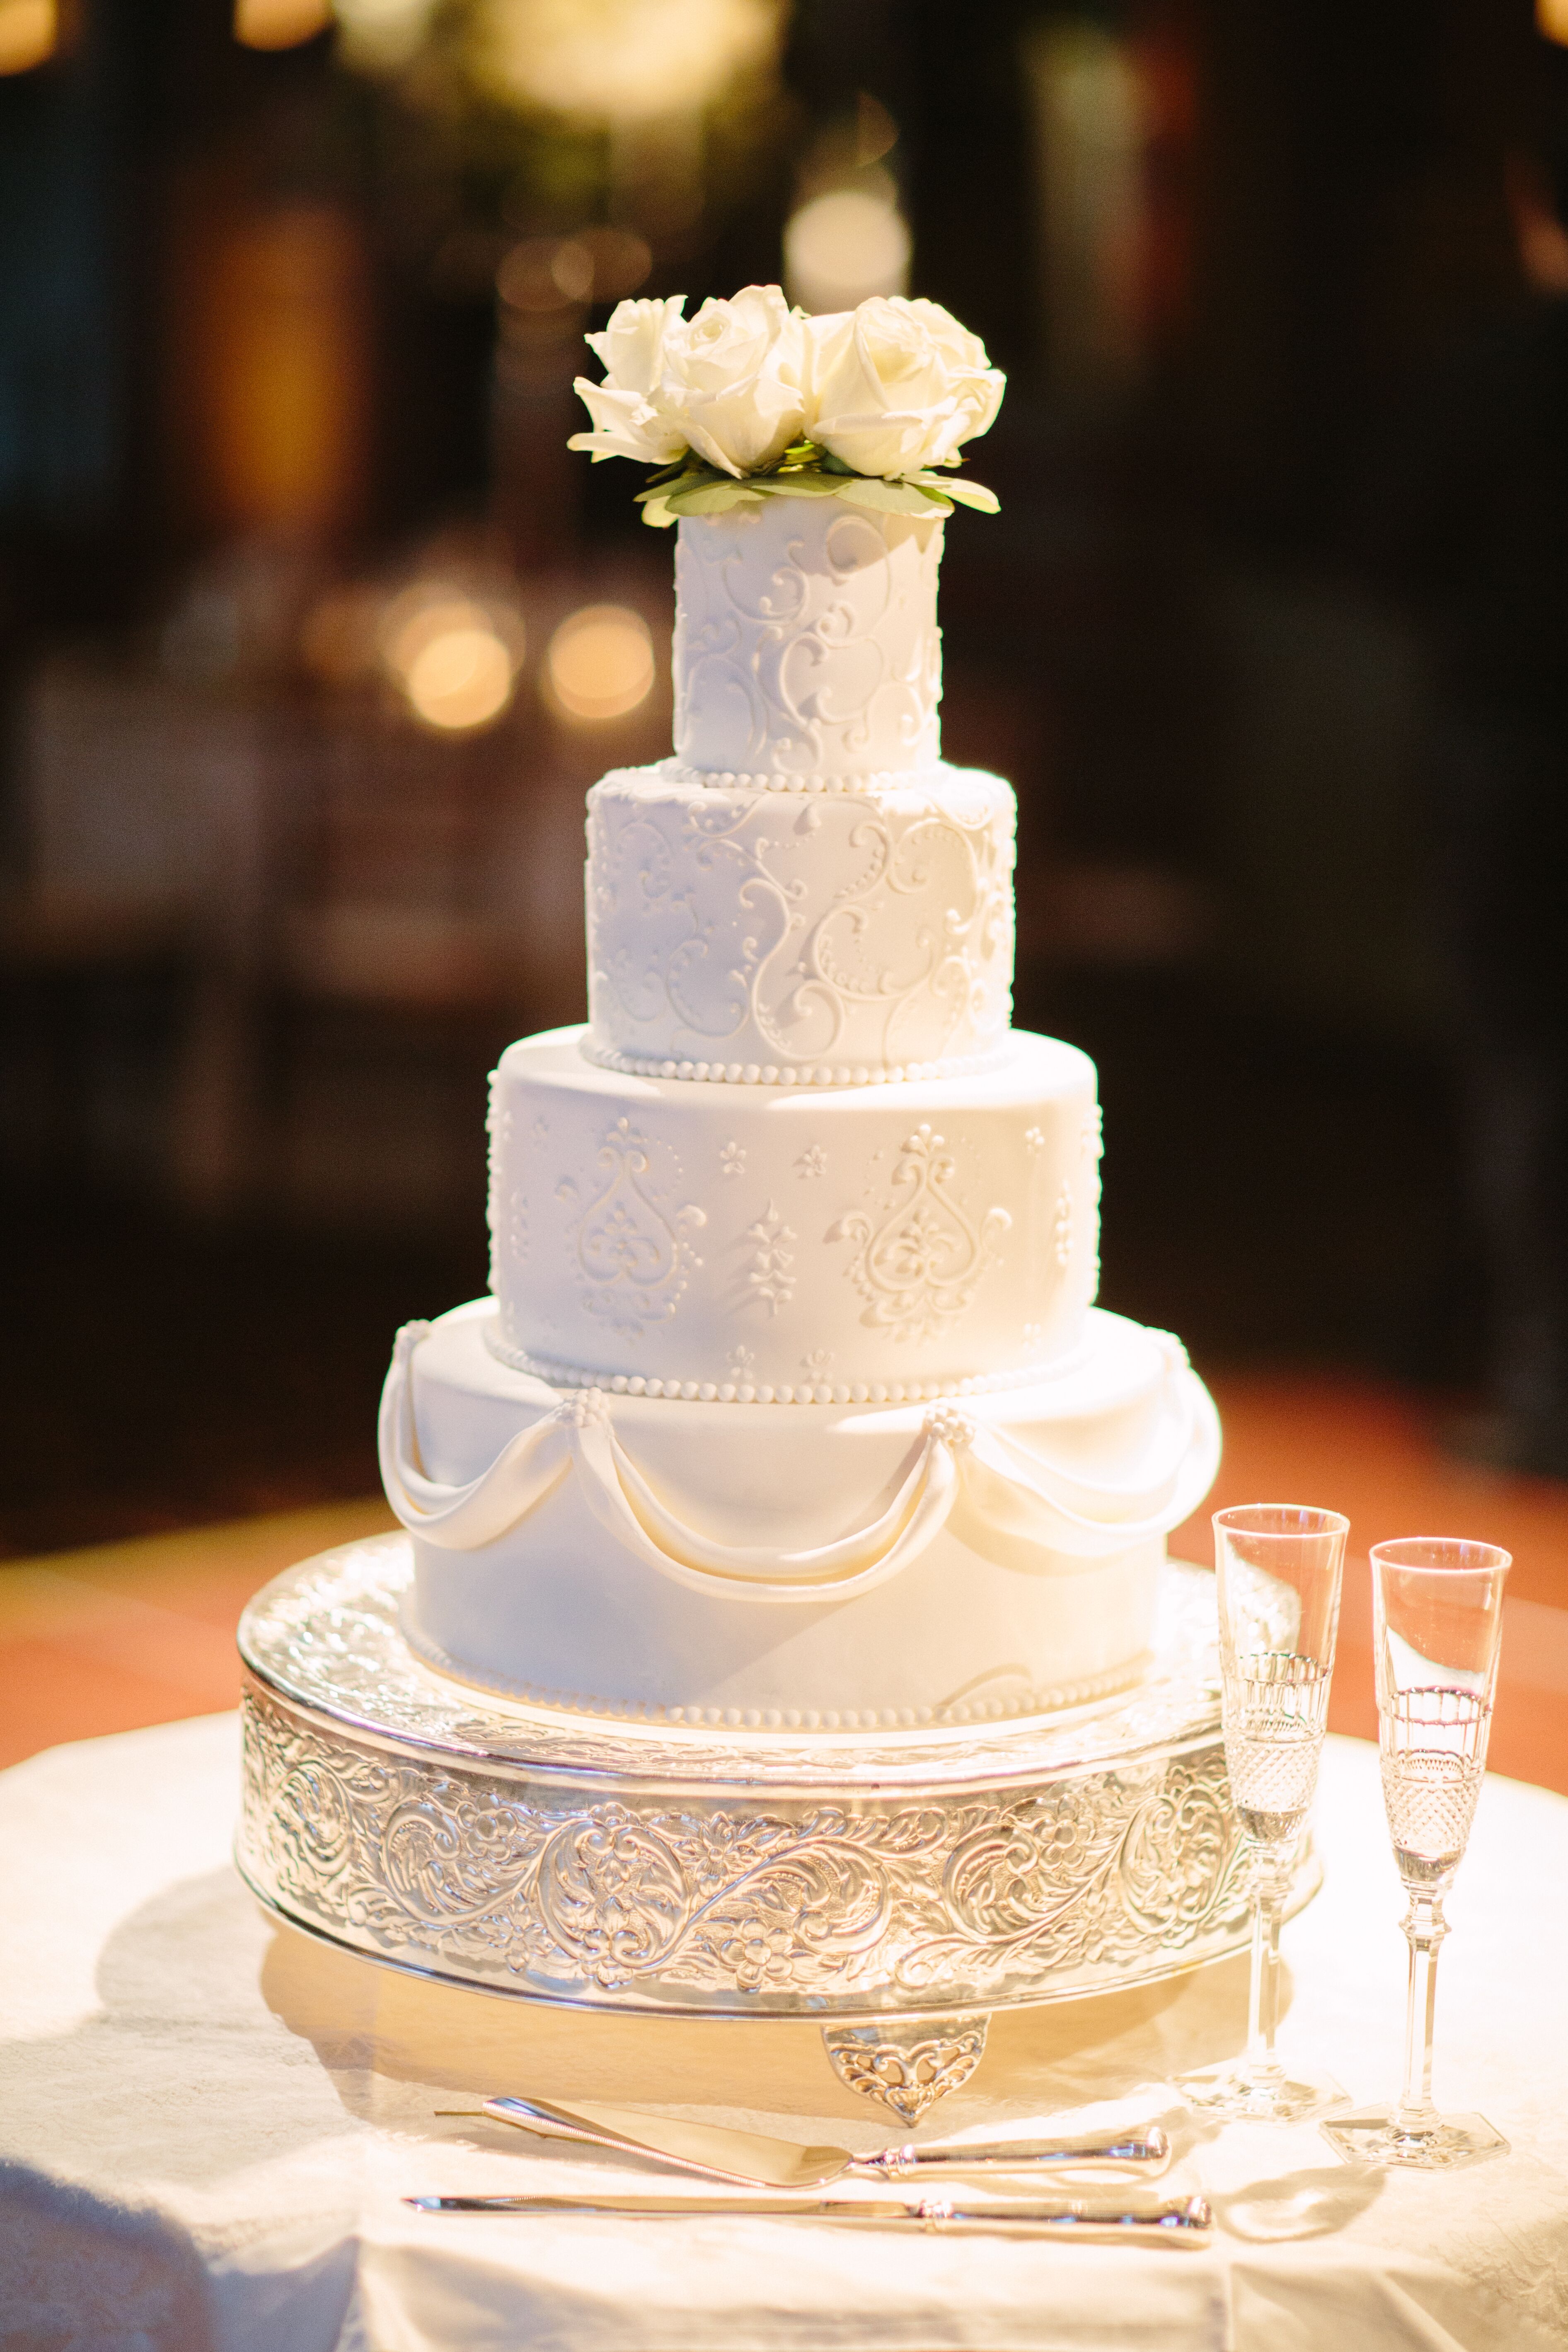 Classic White Wedding Cake With Unusual Flavors